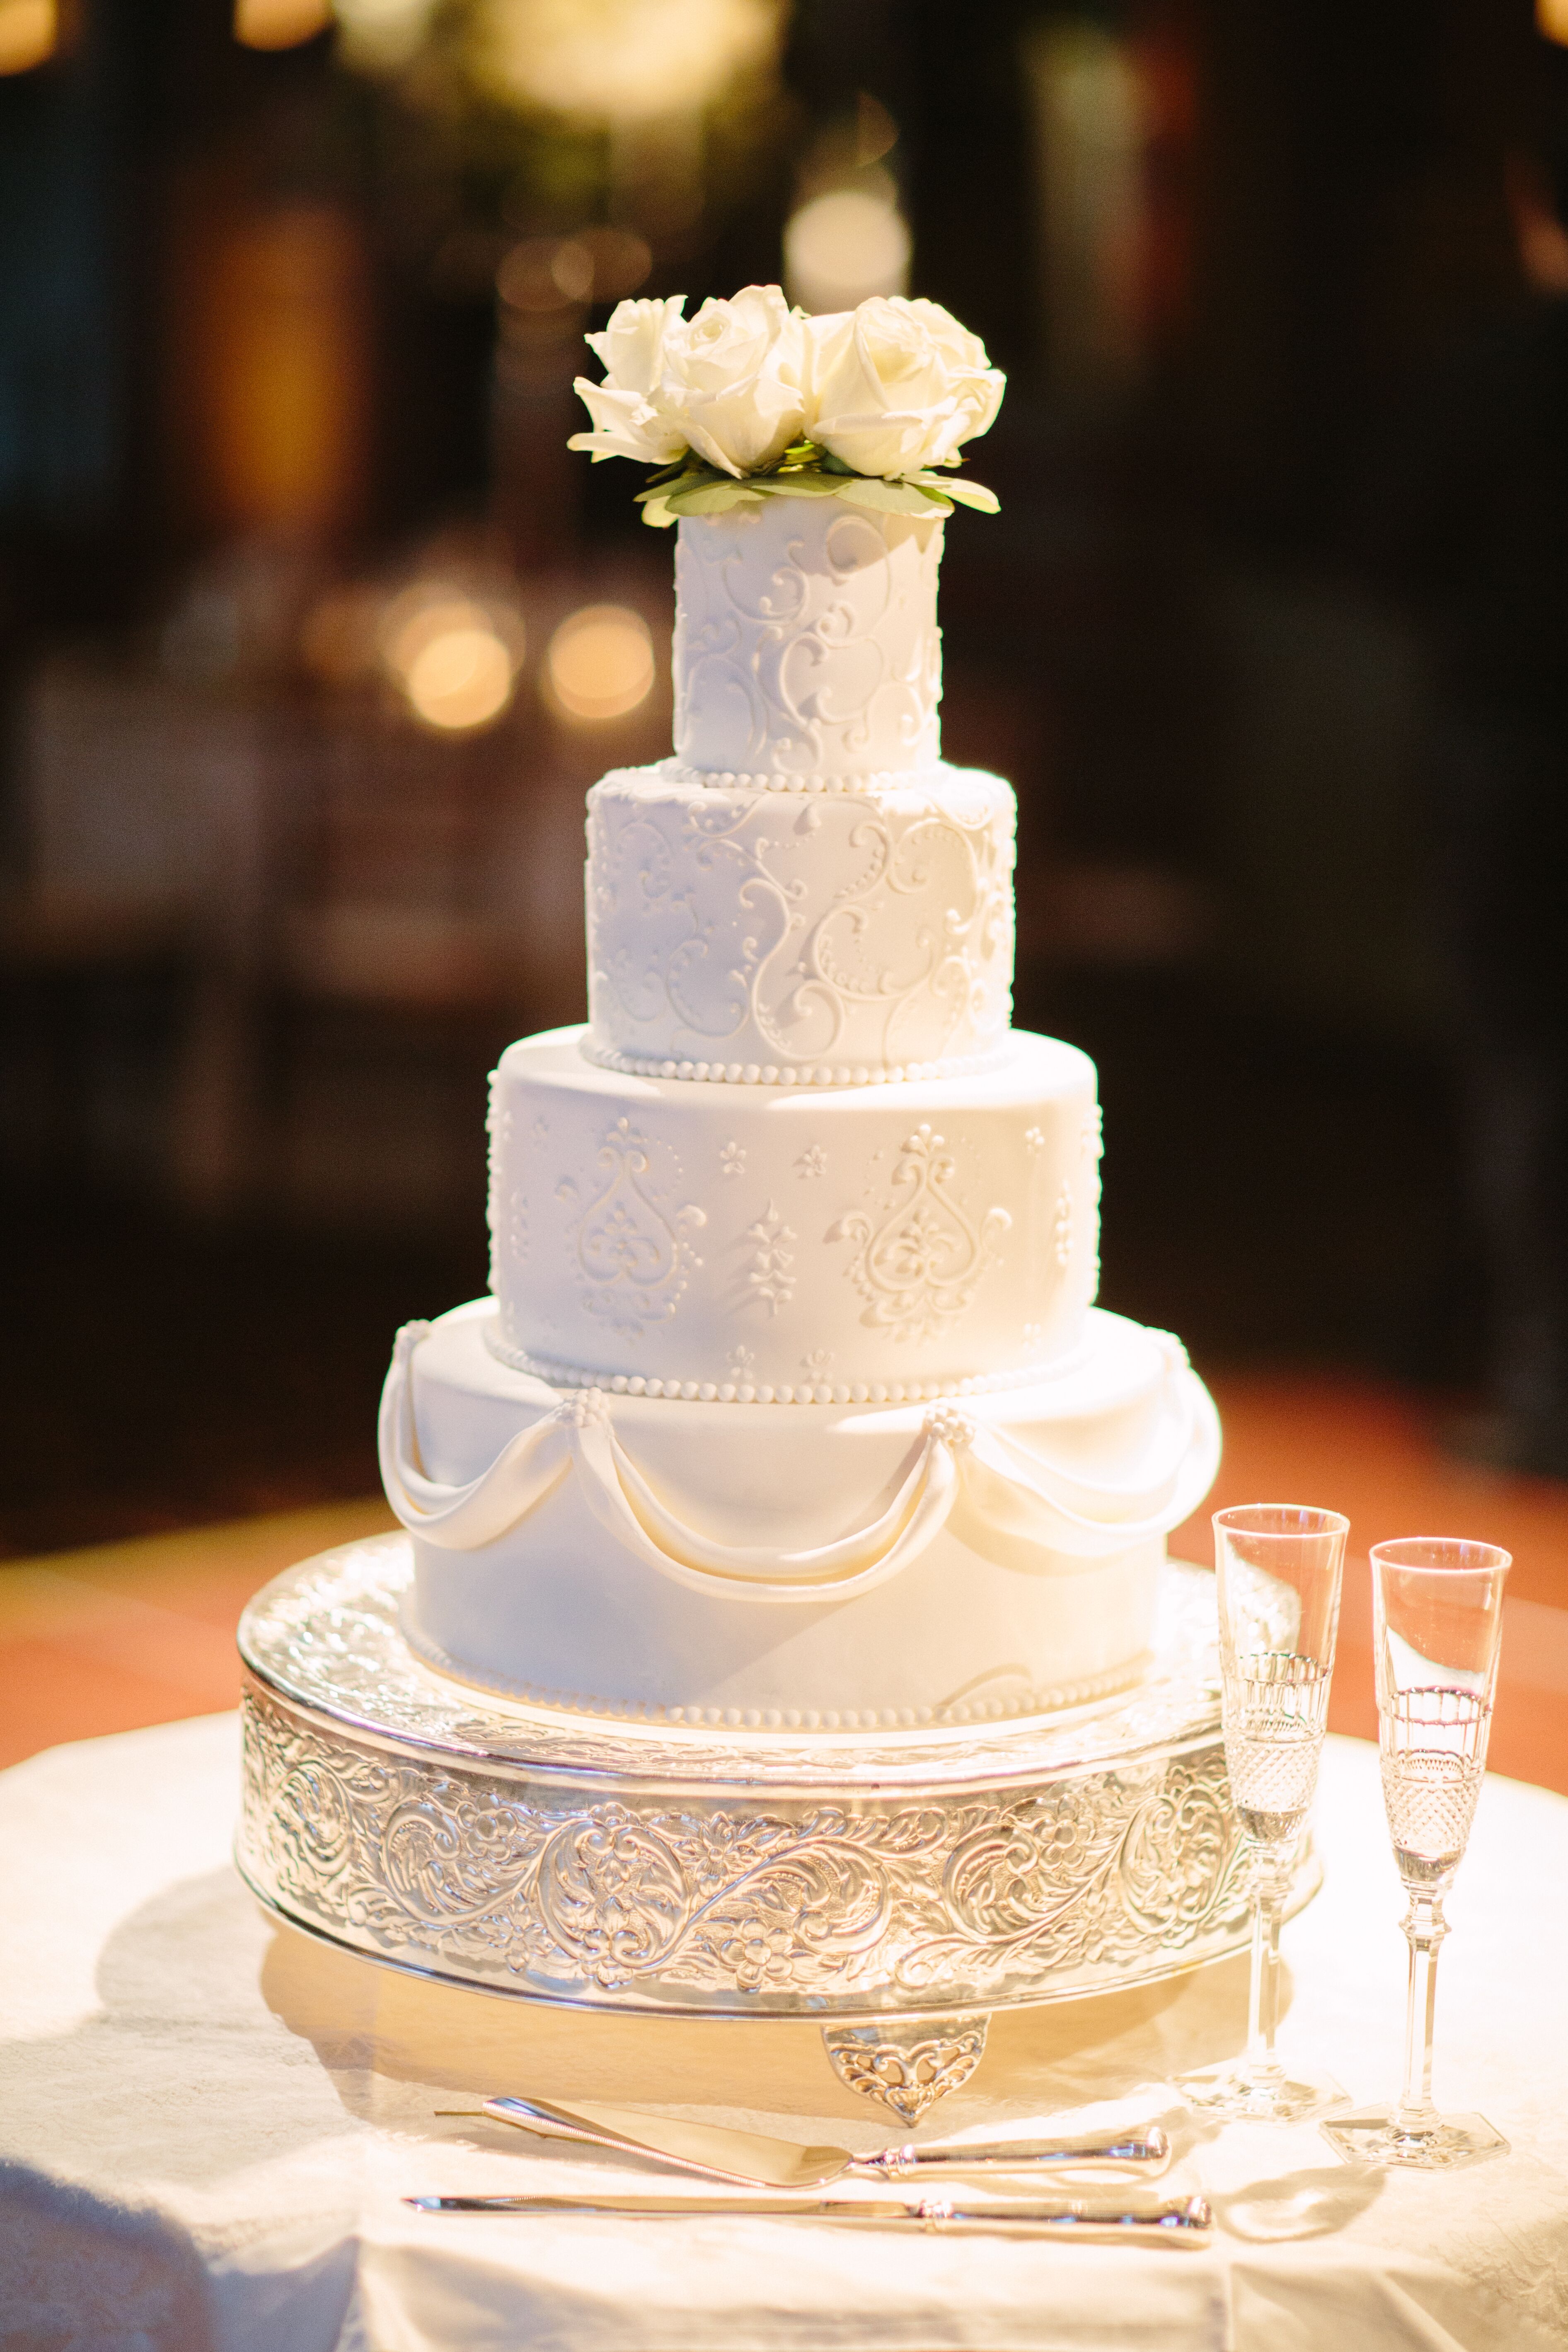 Classic White Wedding Cake With Unusual Flavors